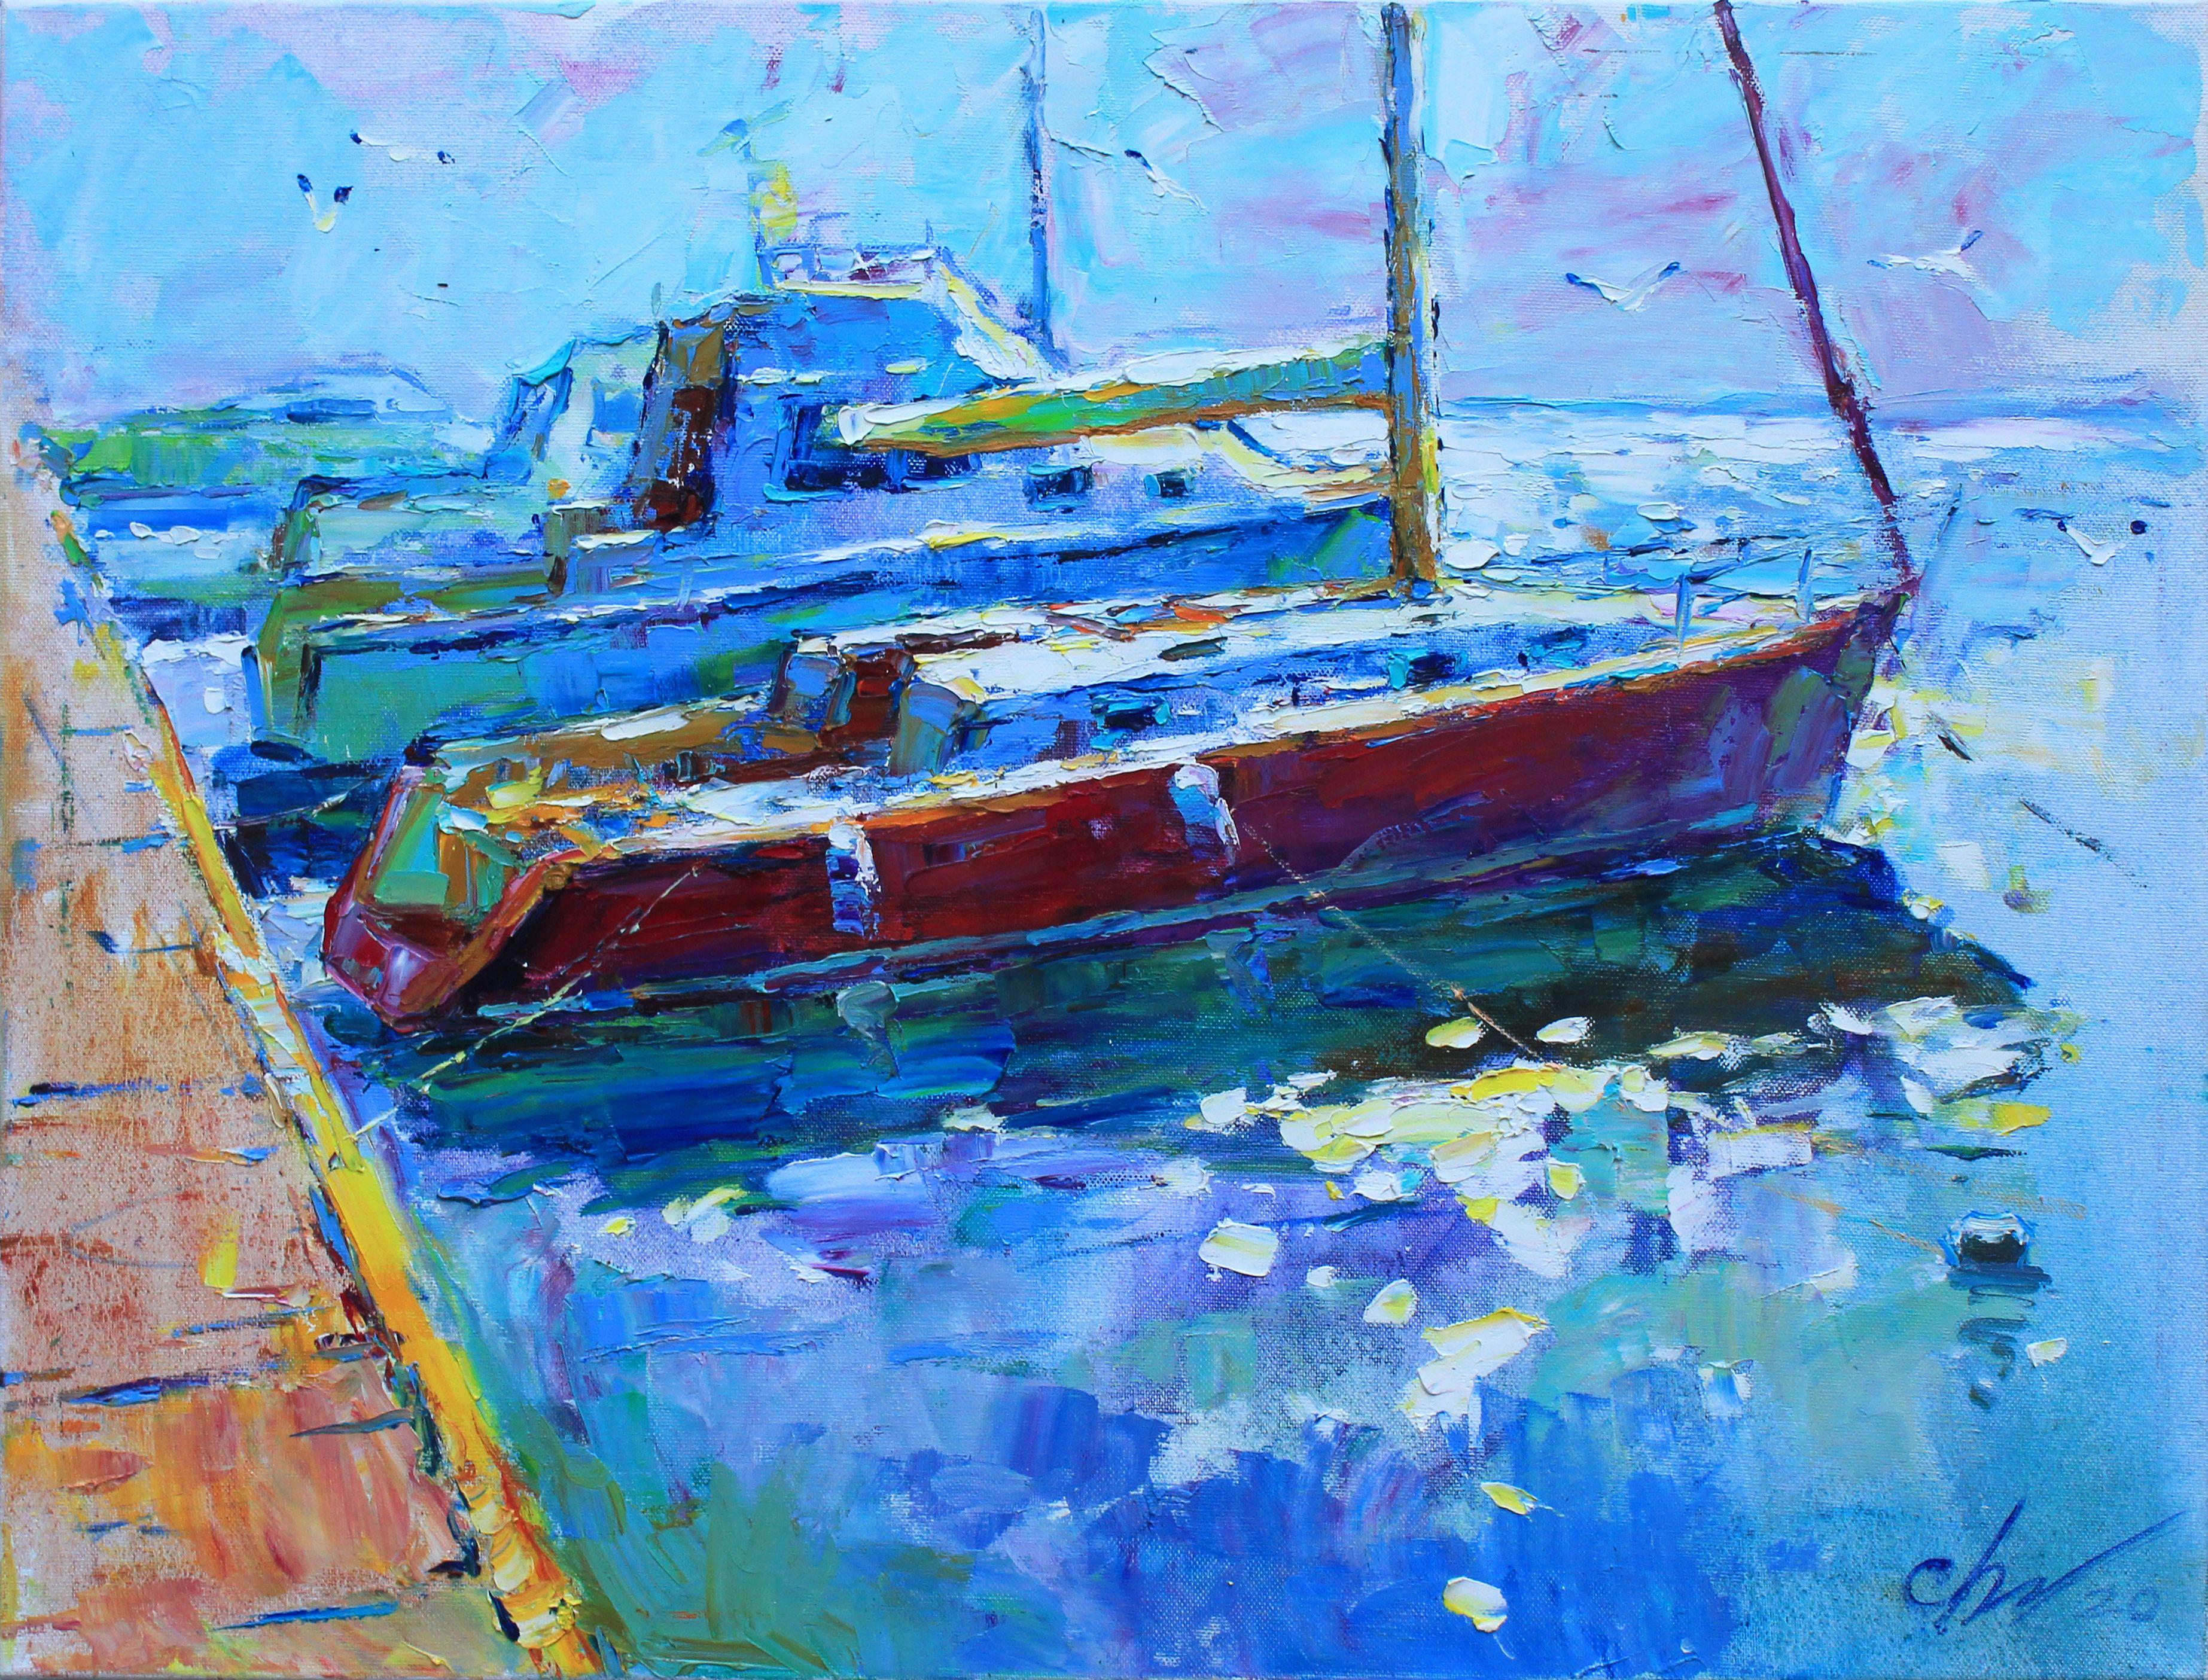 The painting "Yachts" belongs to the series of paintings "SEA".  Painting with yachts, painted in the style of impressionism art, realistic art, expressionism art.  Large painting is done in cold blue colors.  In the background, the distant sea